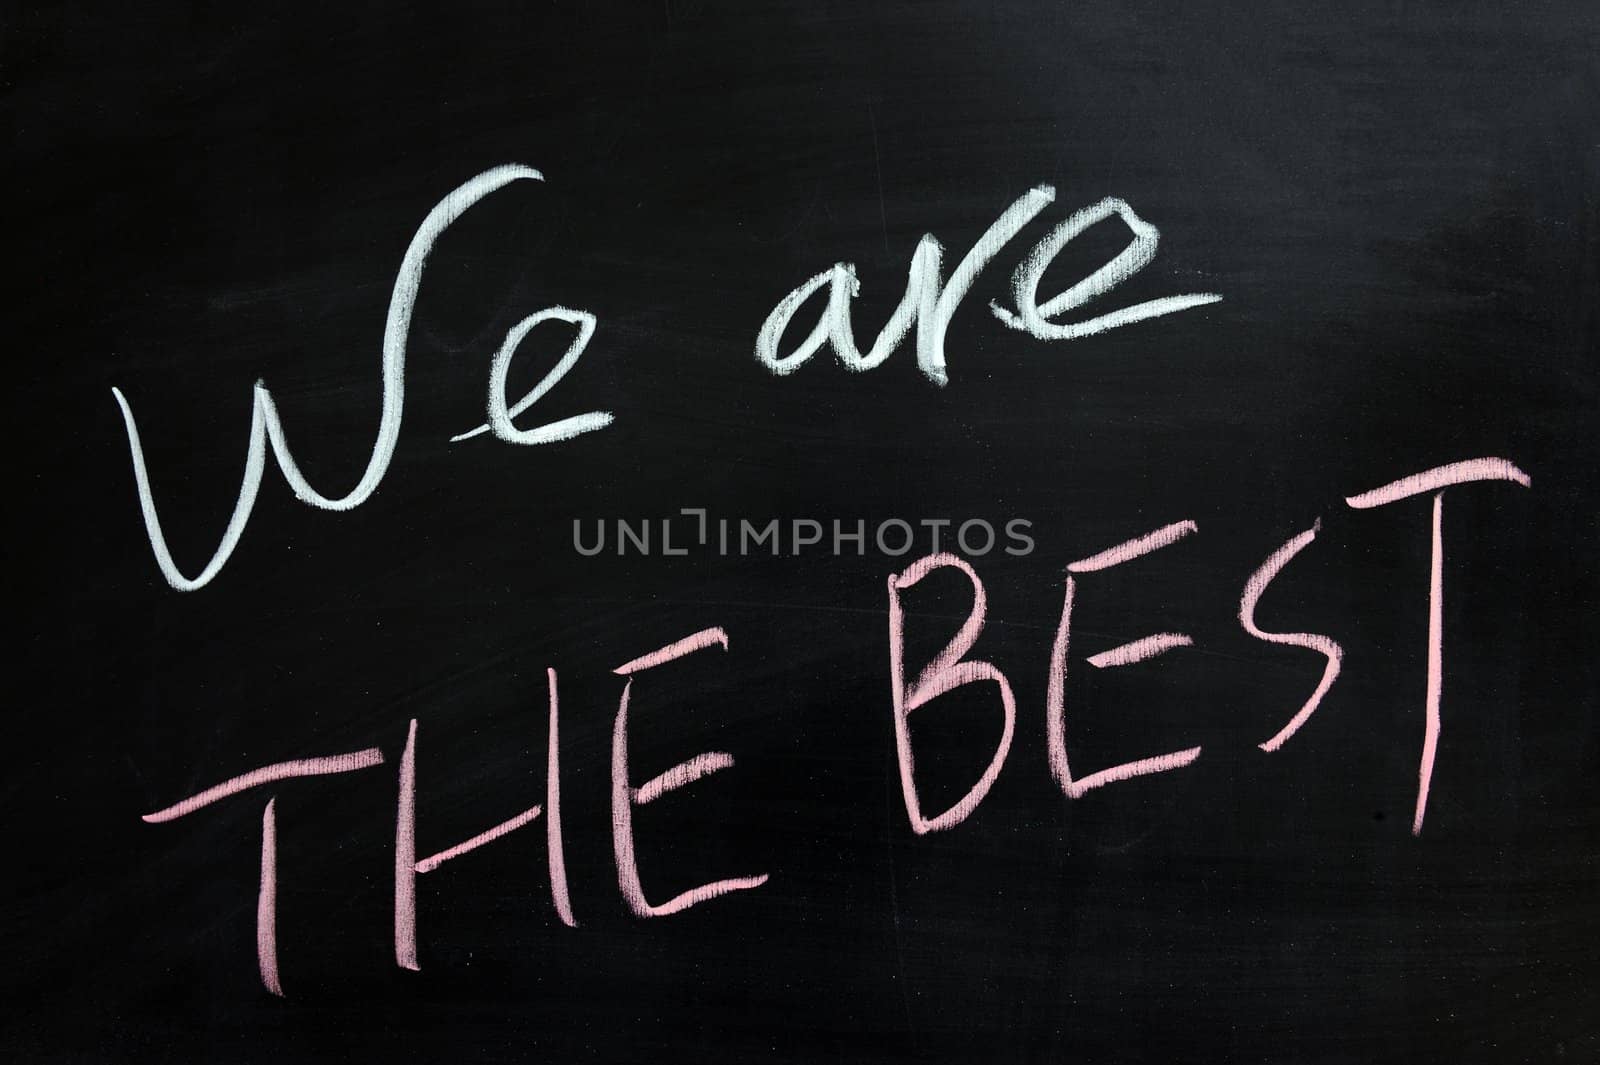 "We are the best" on chalkboard by raywoo